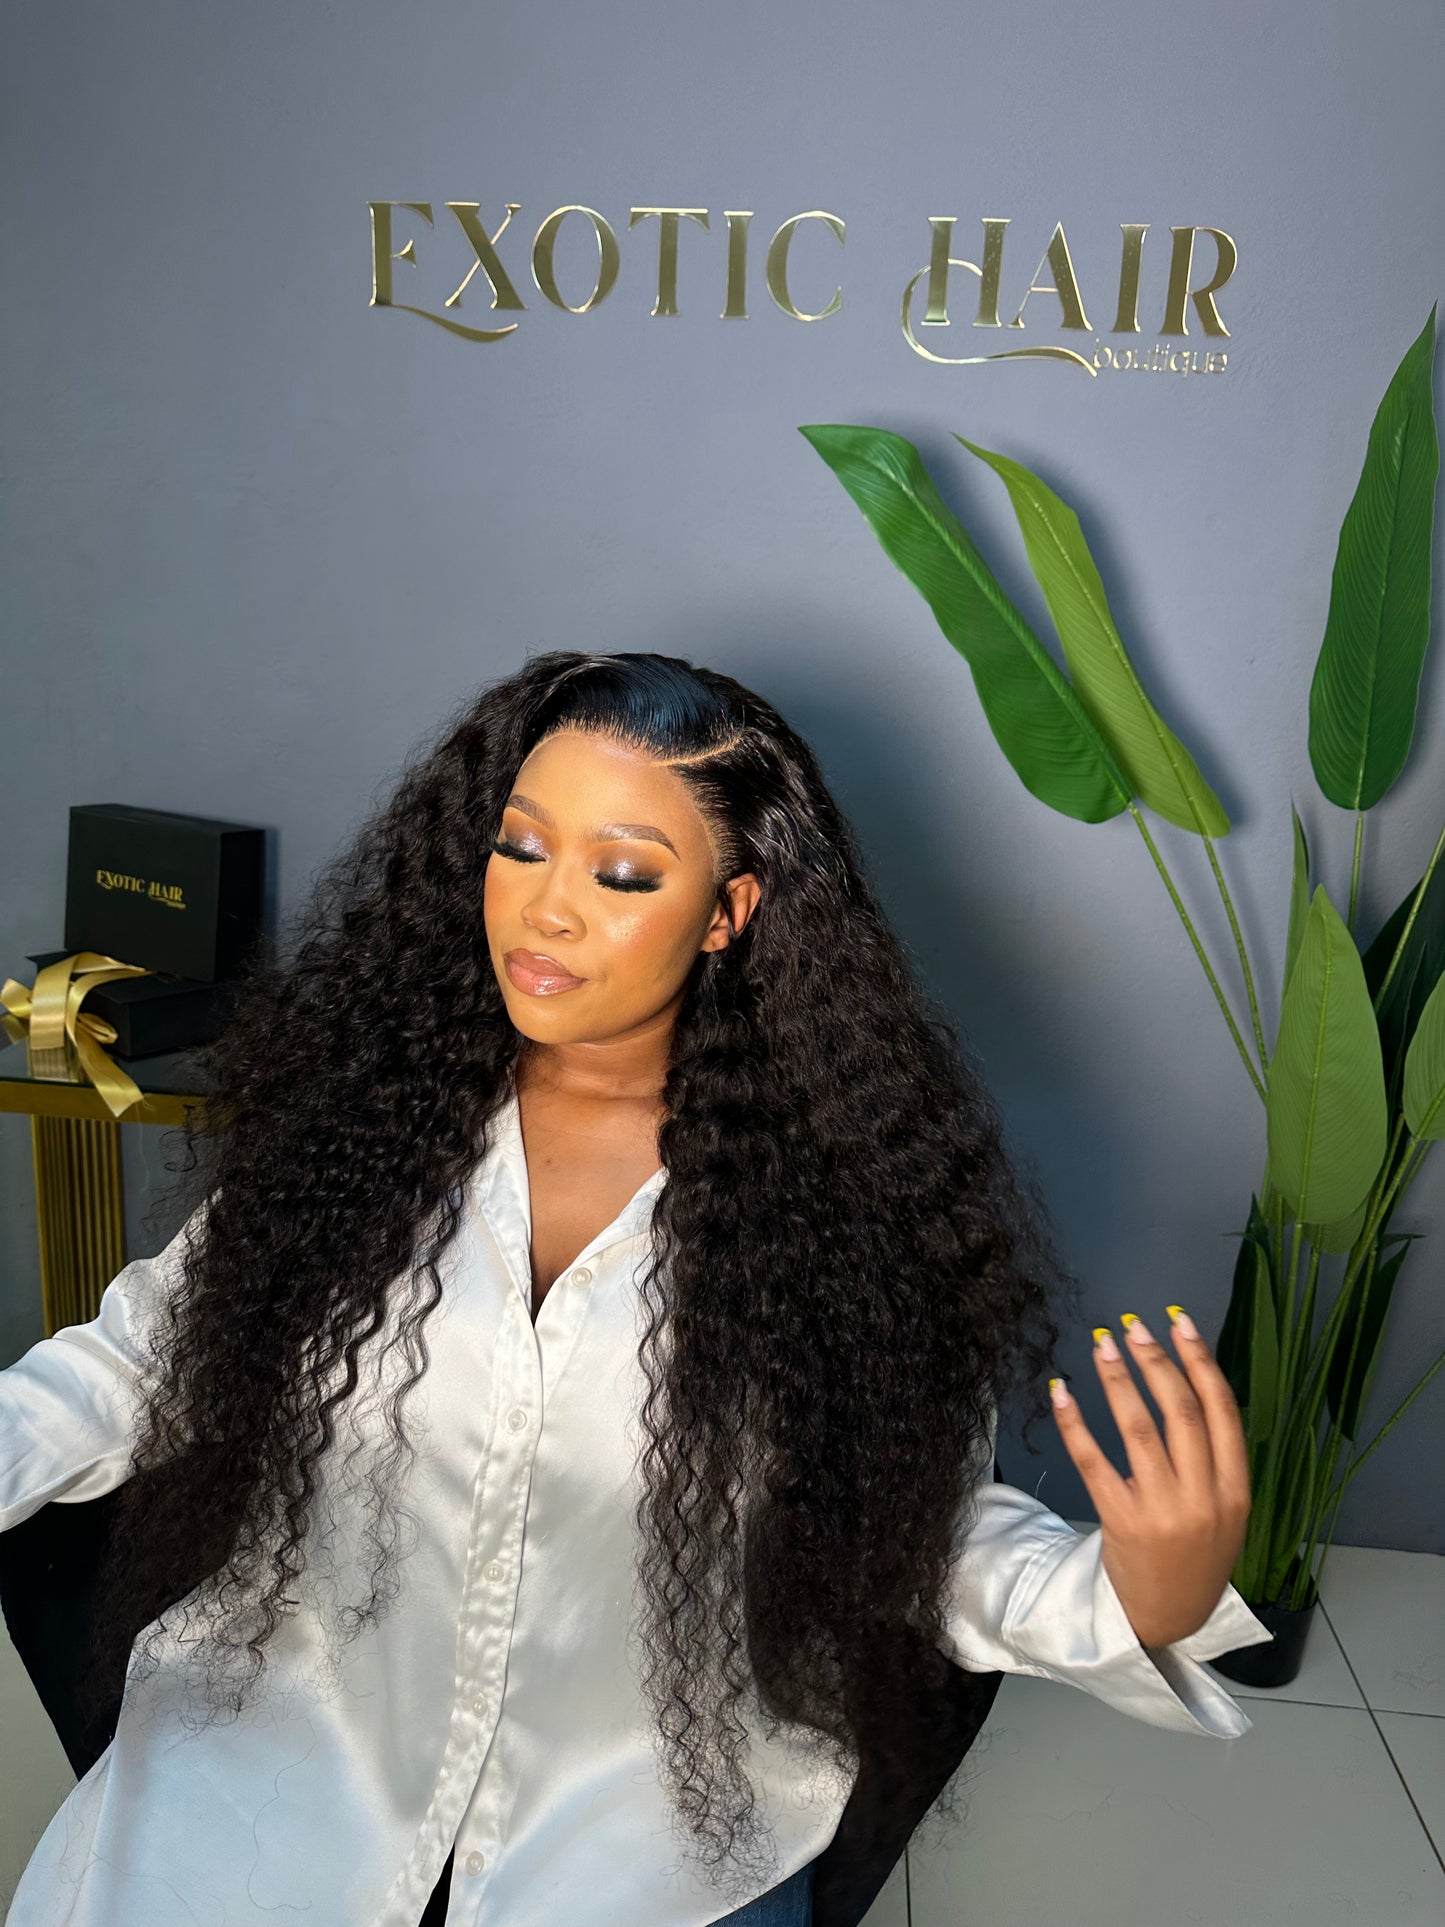 Frontals wigs - Malaysian curls